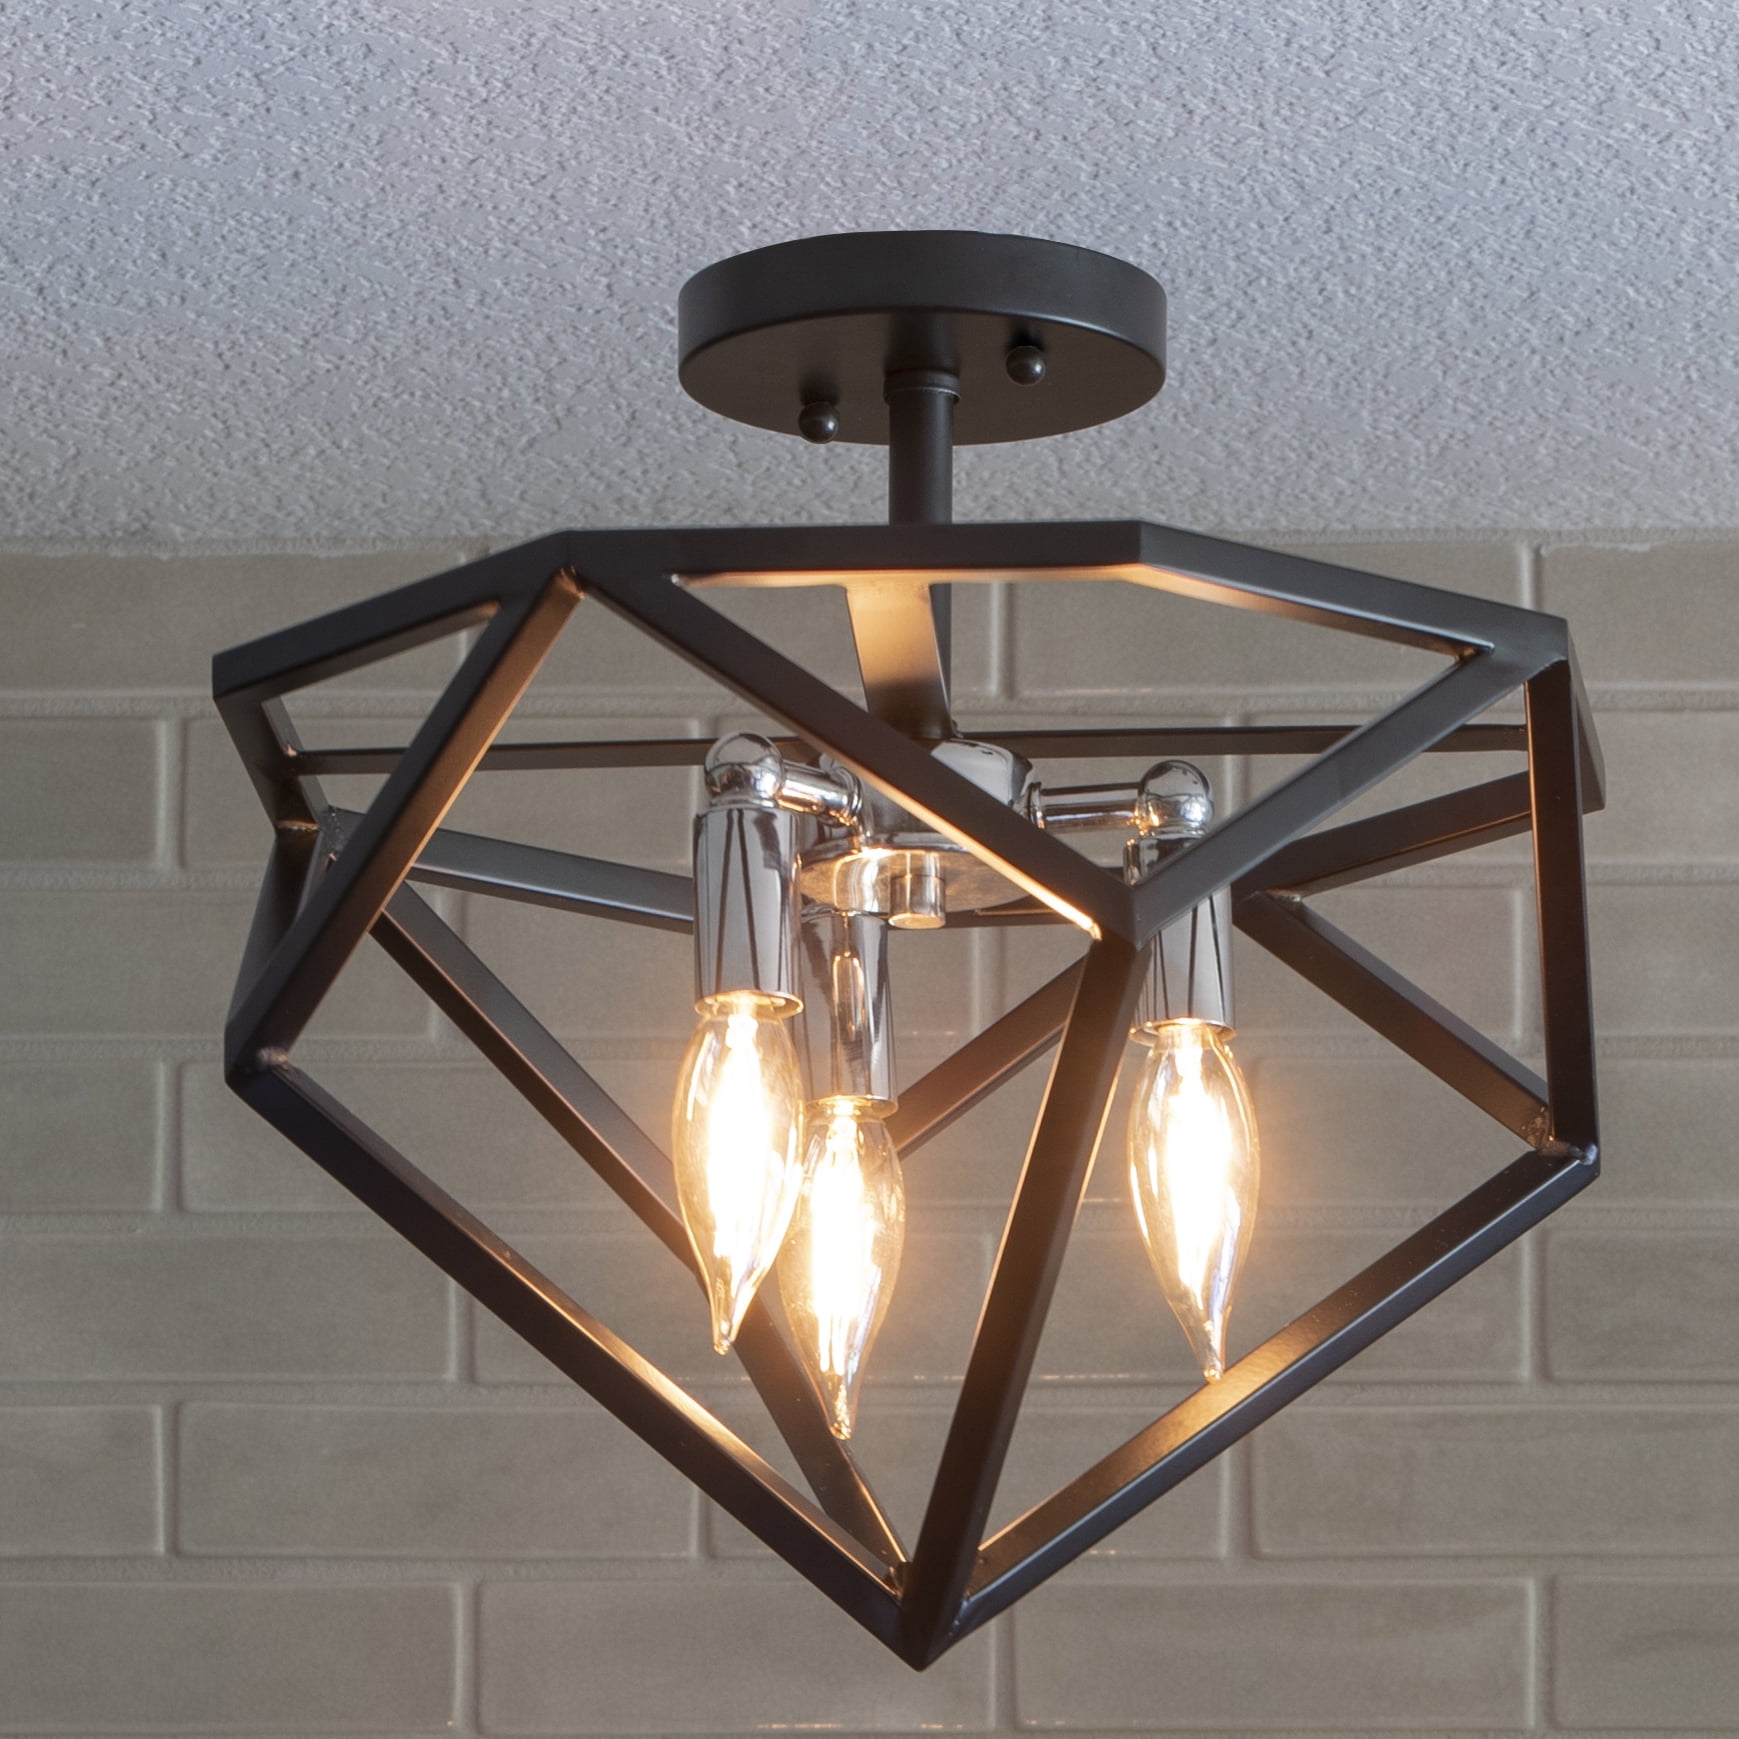 Industrial Mini Semi Flush Mount Ceiling Light For Patio Outdoor Fixture with Handcrafted Geometric Metal Shape